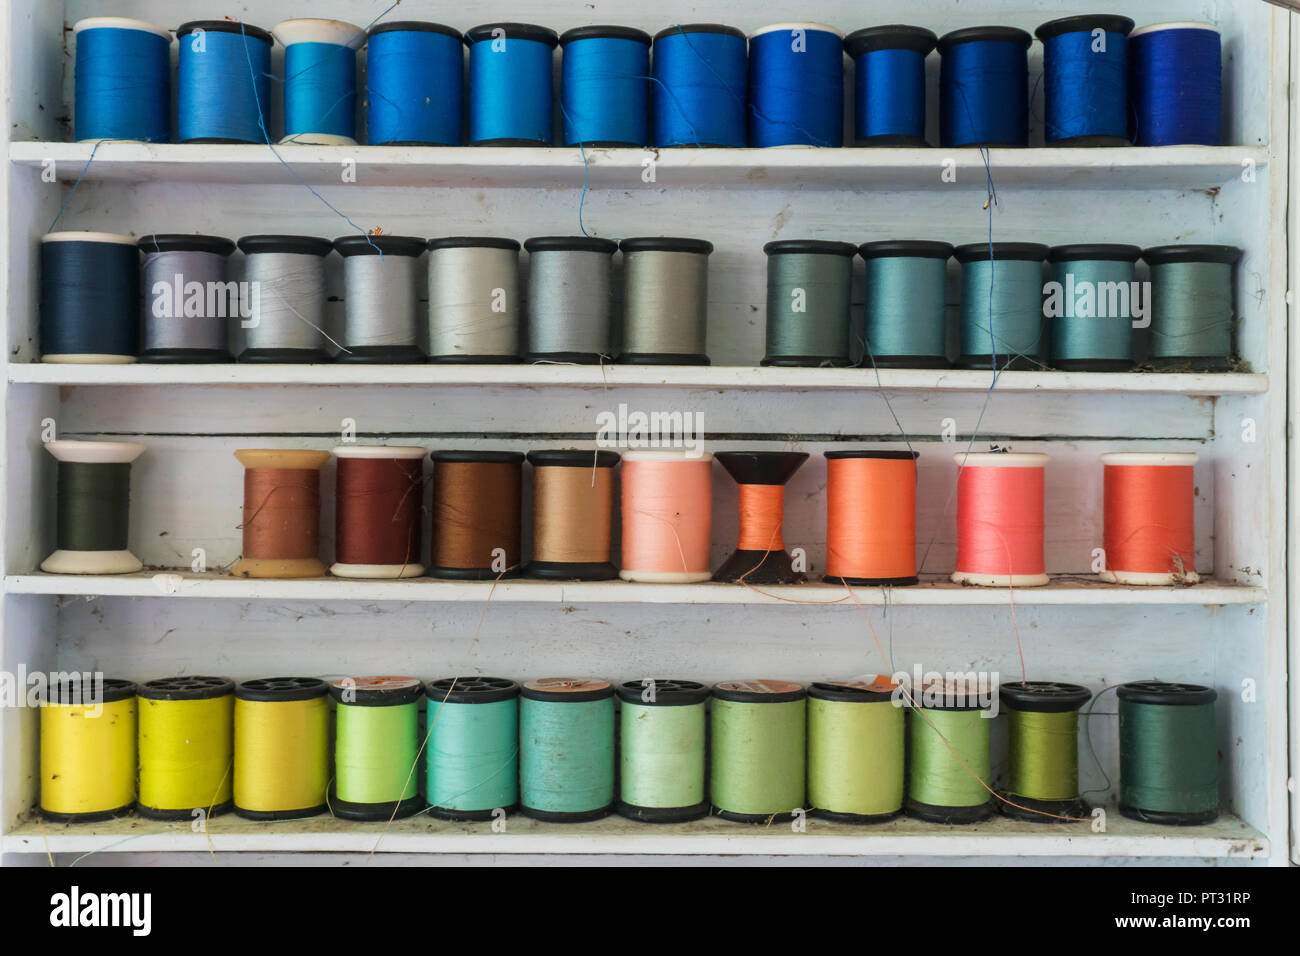 Colorful sewing materials Stock Photo - Alamy